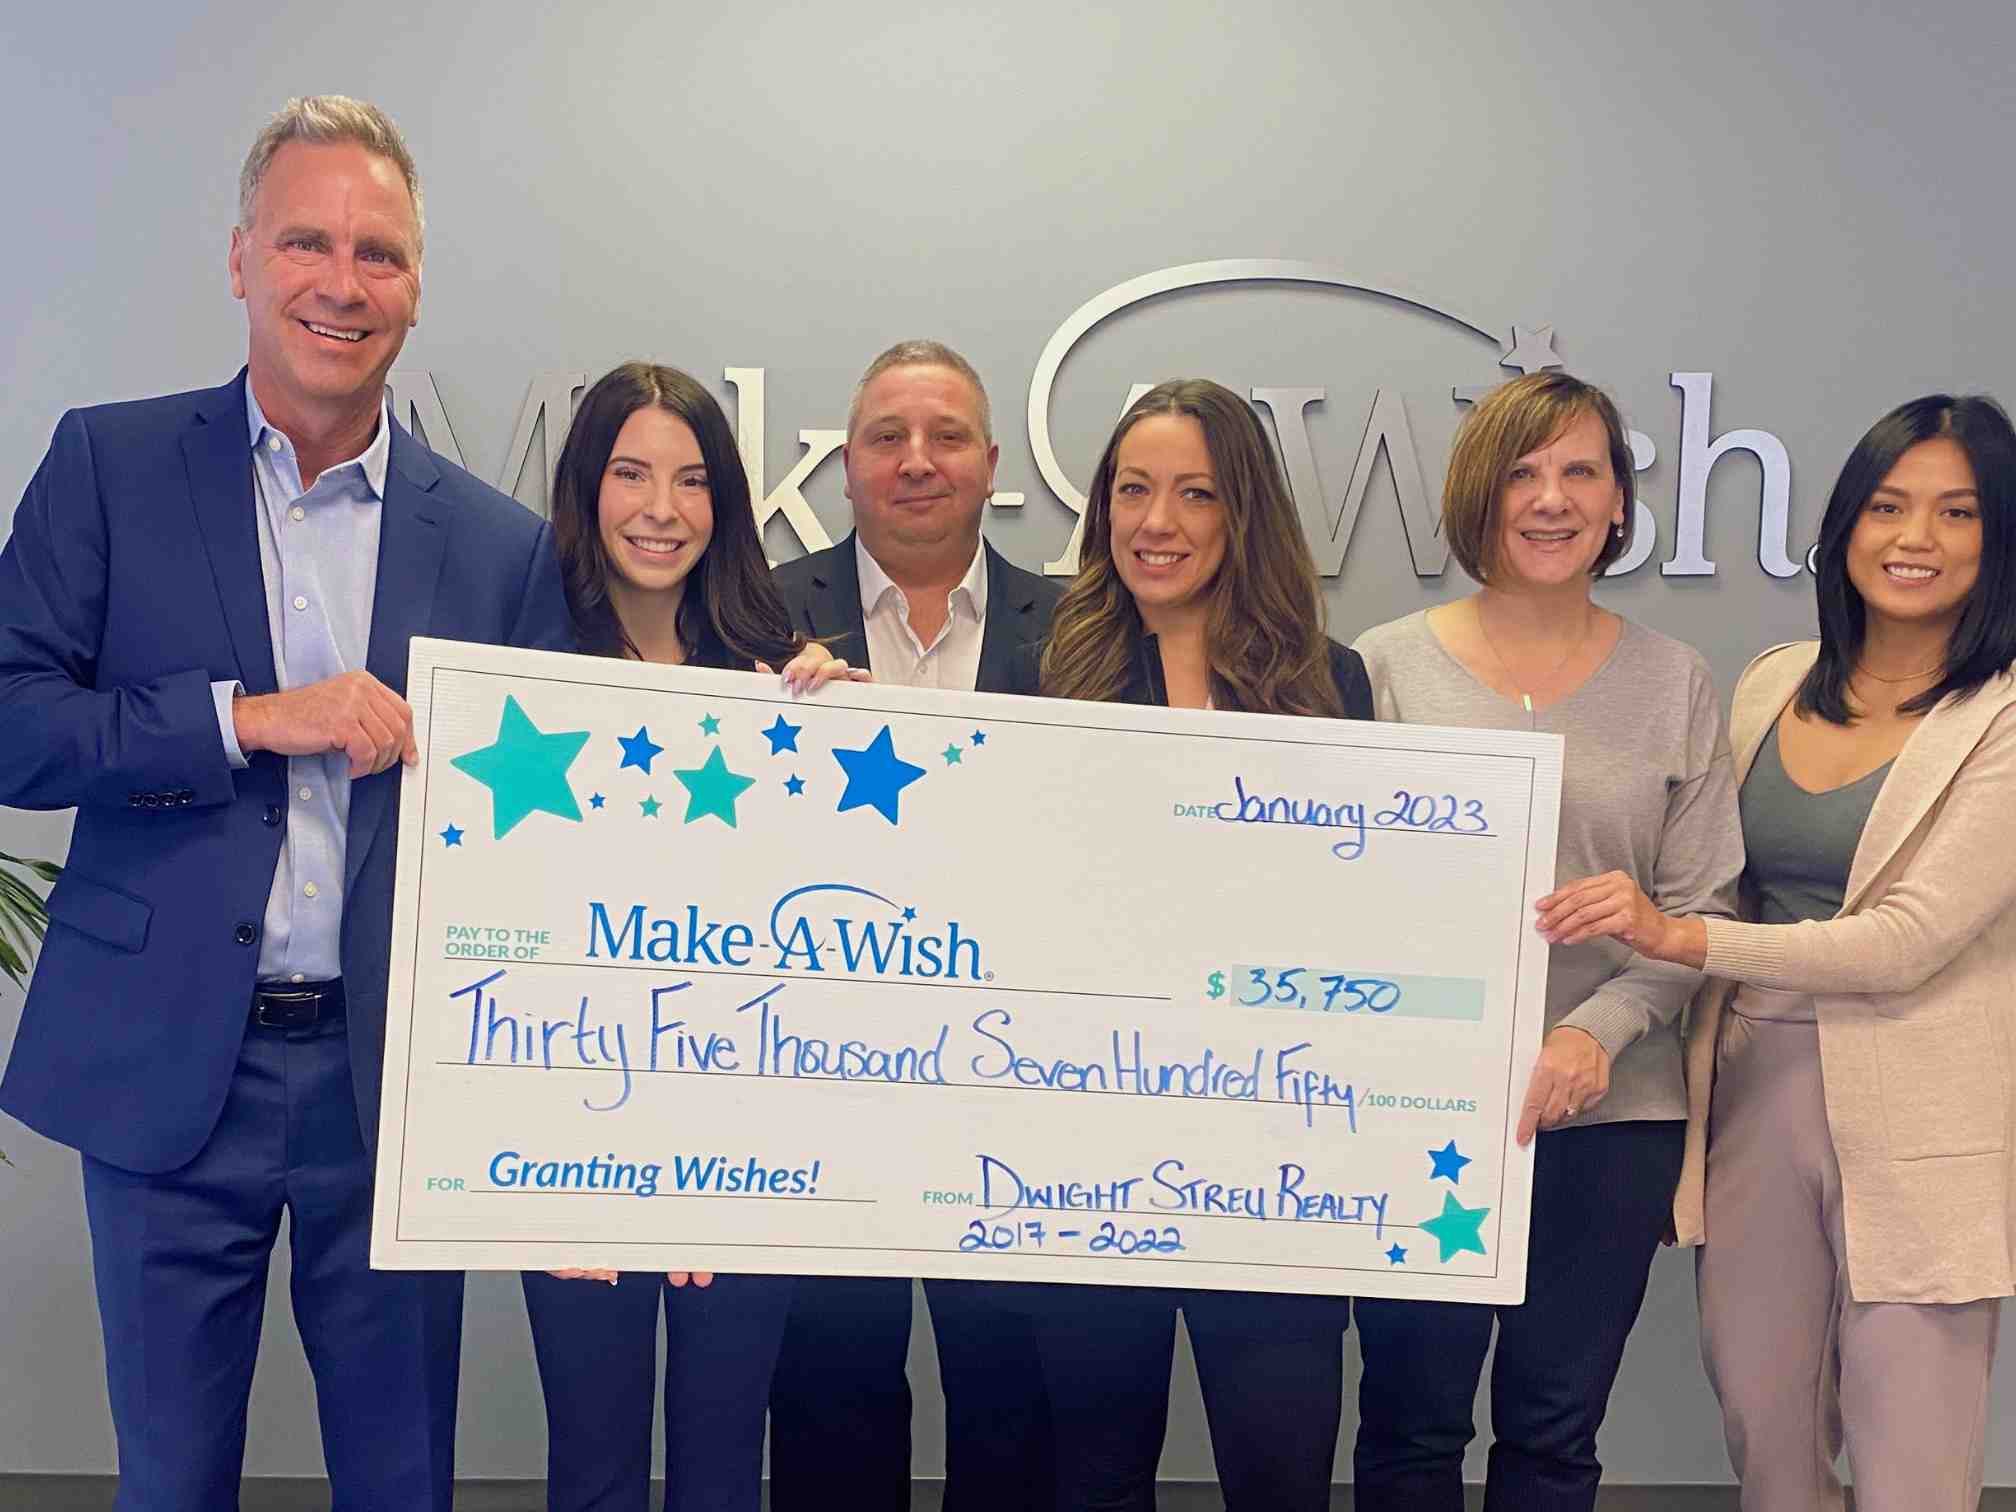 Dwight Streu Real Estate Team Gives Back to Make-A-Wish. 